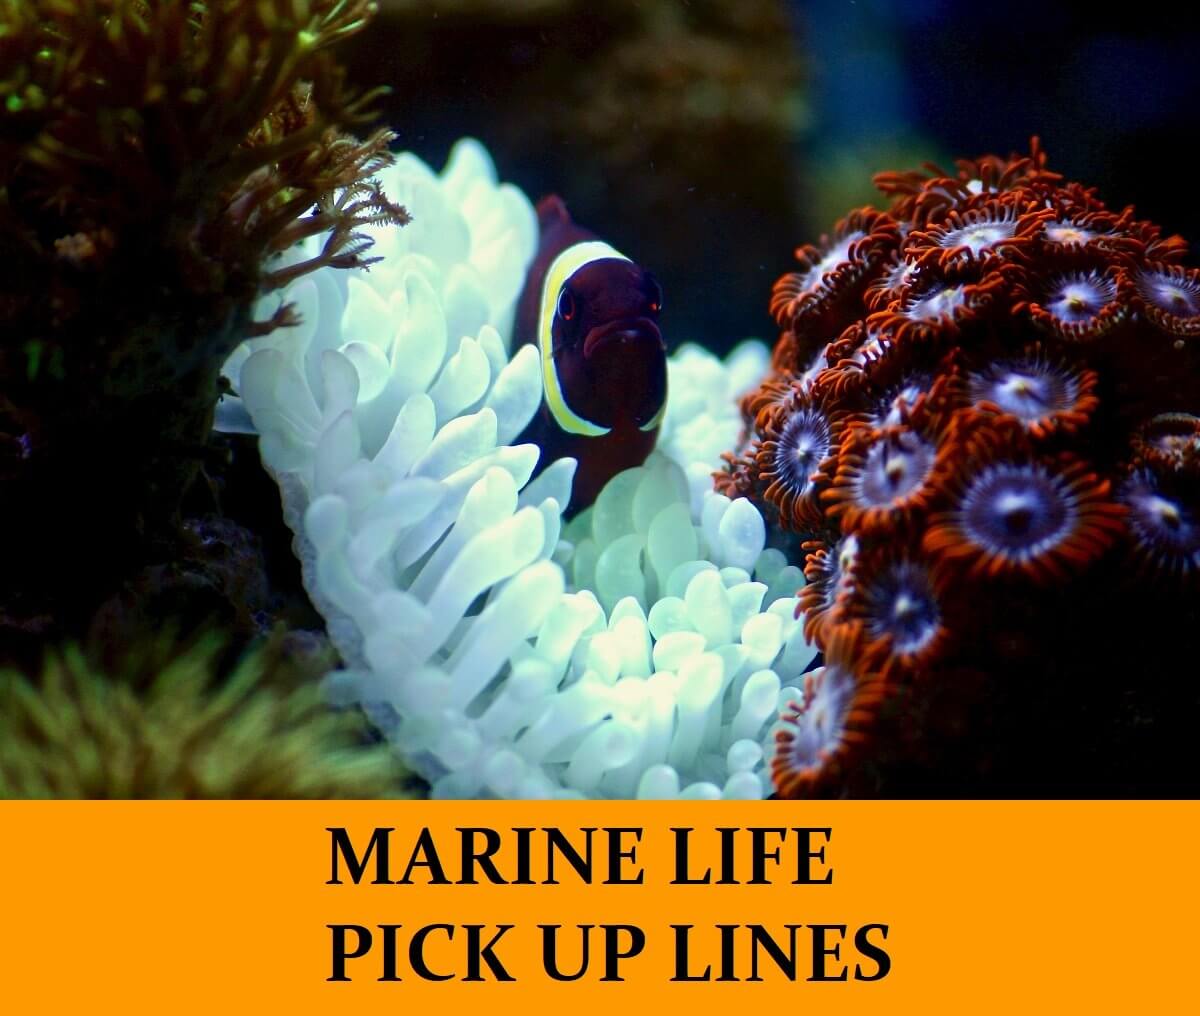 Pick Up Lines About Marine Life